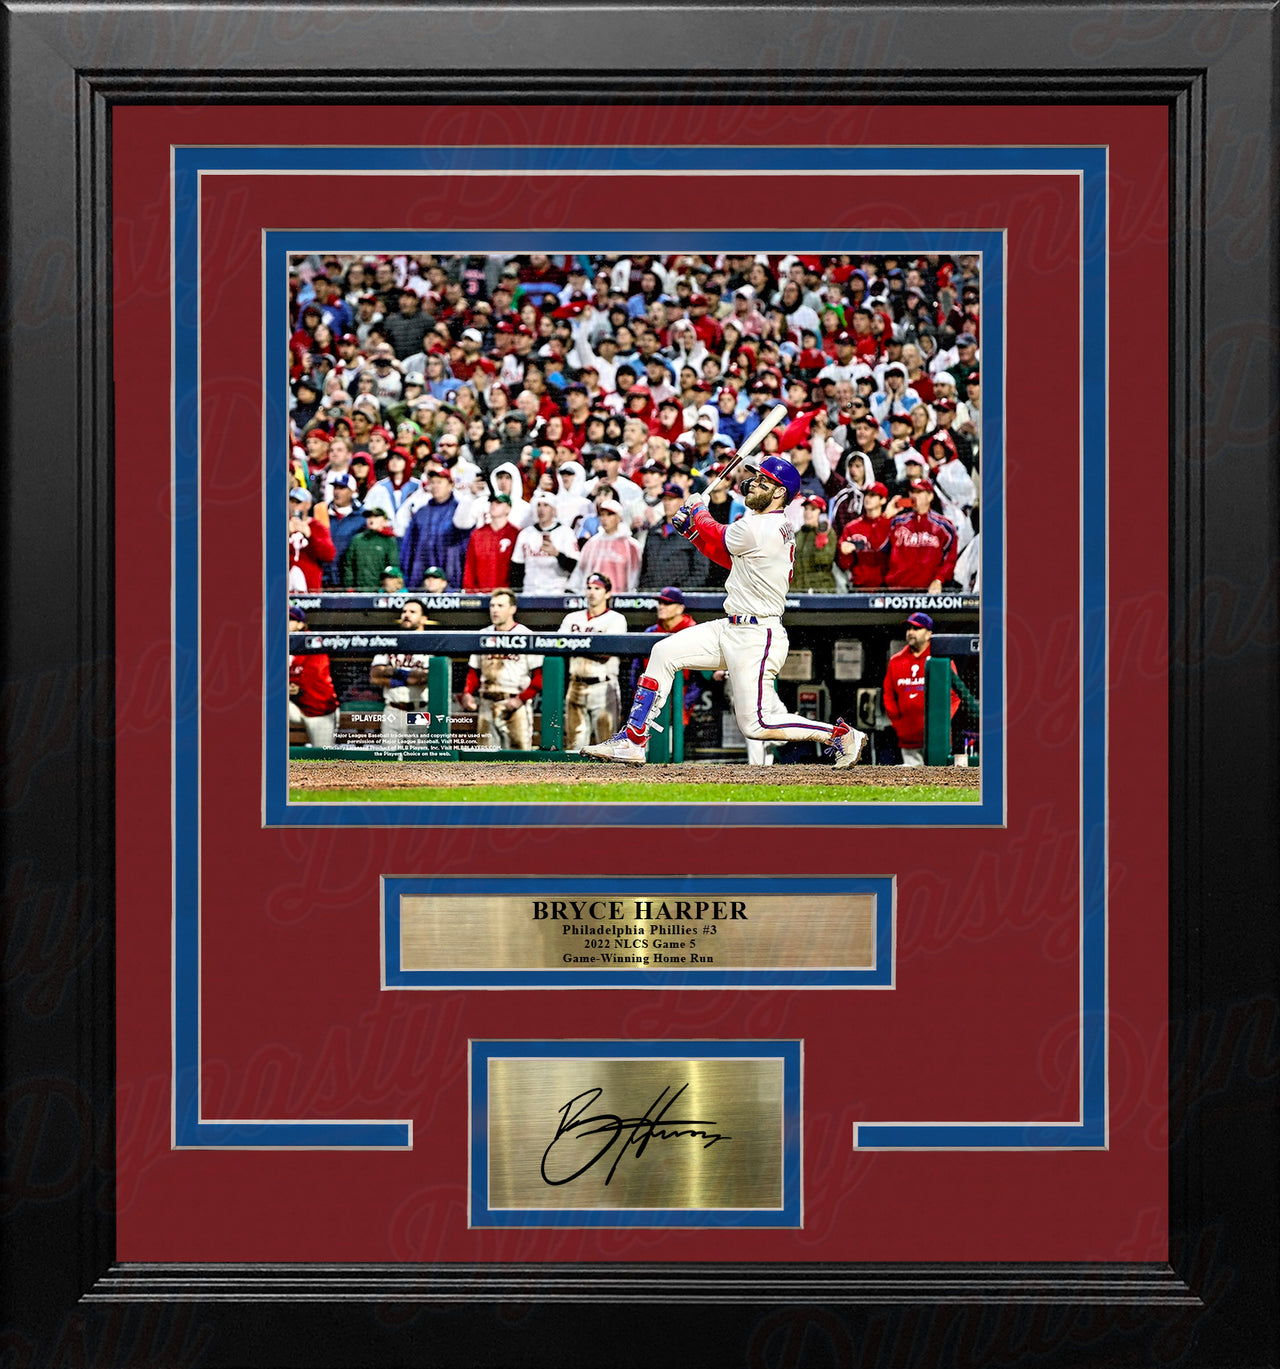 Compton Youth Academy Auction: Bryce Harper Autographed